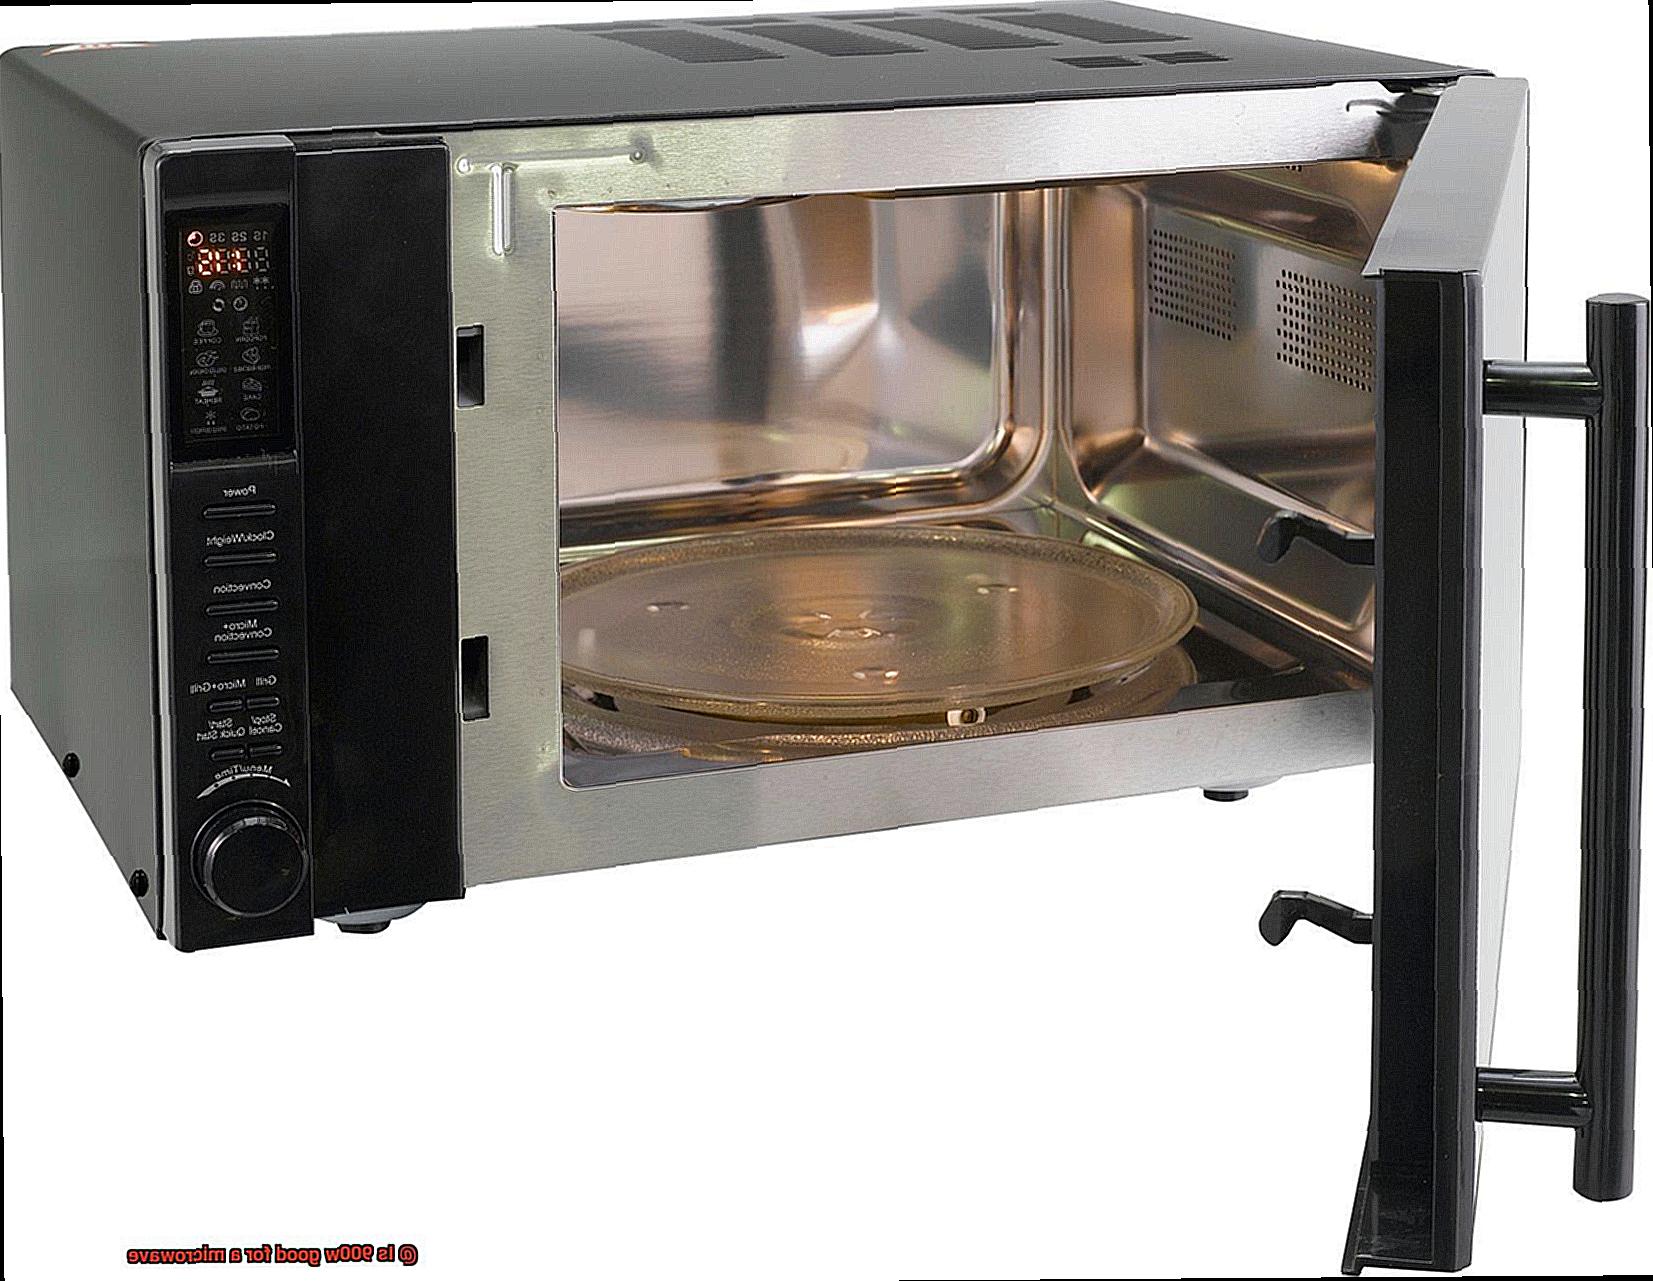 Is 900w good for a microwave-3